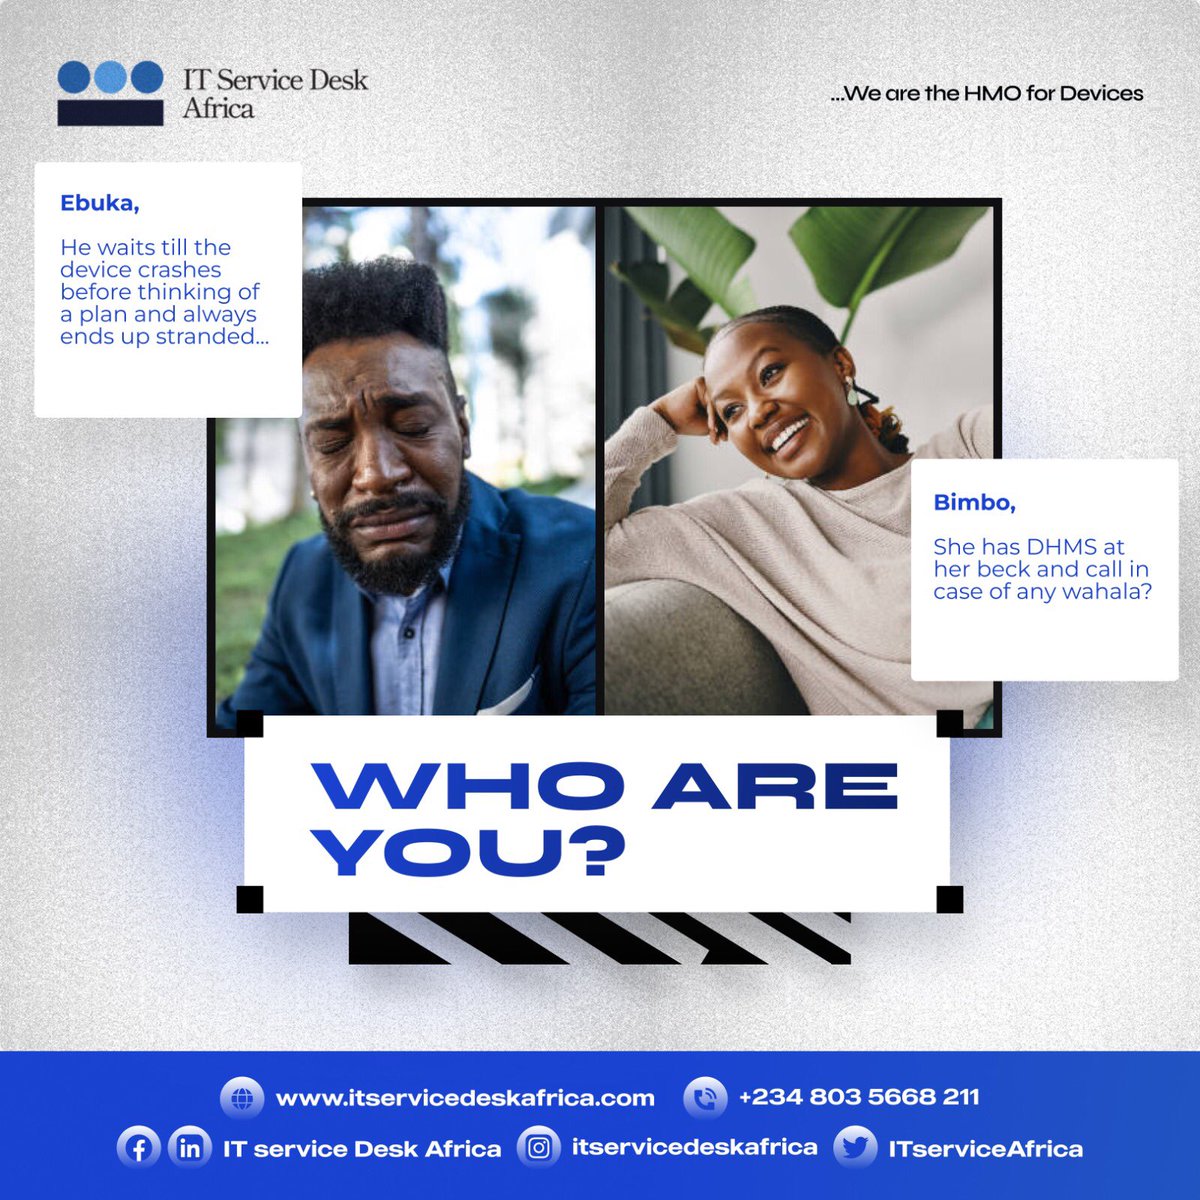 Who are you?

Ebuka, the 'crash-and-react' type who waits until disaster strikes before thinking of a plan?

Or Bimbo, the 'prepared and proud' one who has DHMS on speed dial, ready to save the day in case of any tech troubles?

Let us know! #DHMS #StayPrepared  #ITSupport